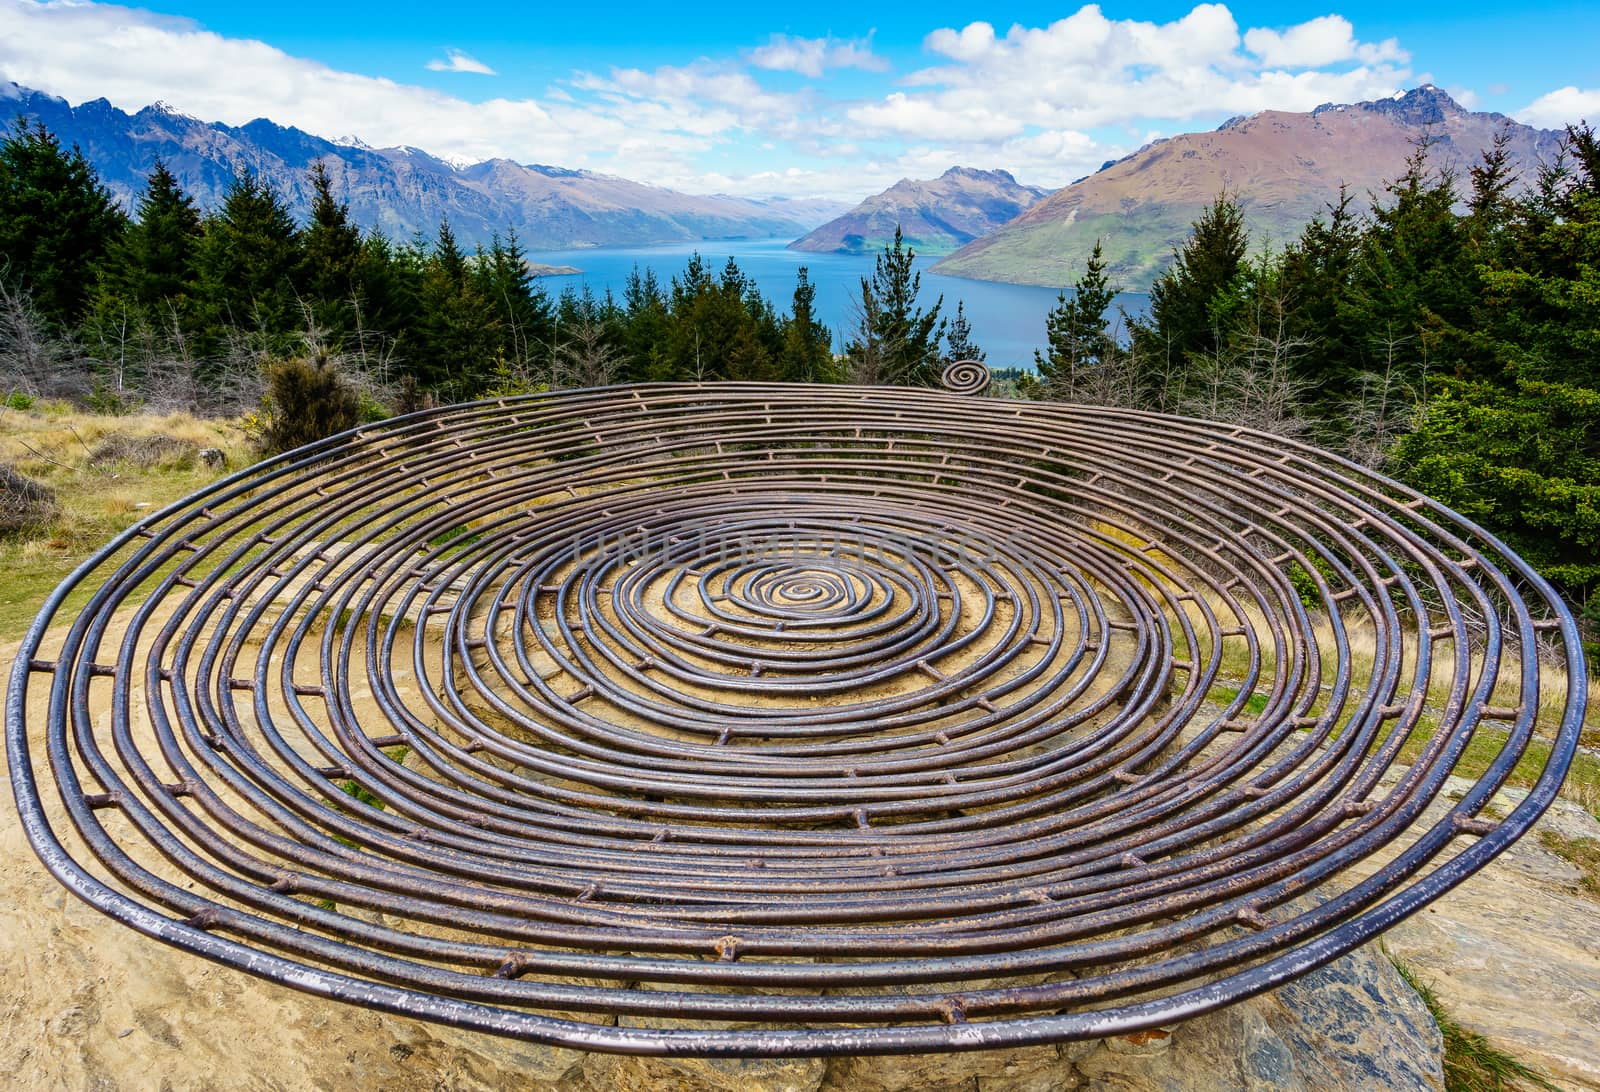 Metallic concentric circle sculpture. Basket of dreams. View point looking out over lake and mountains. Queens town, New Zealand.